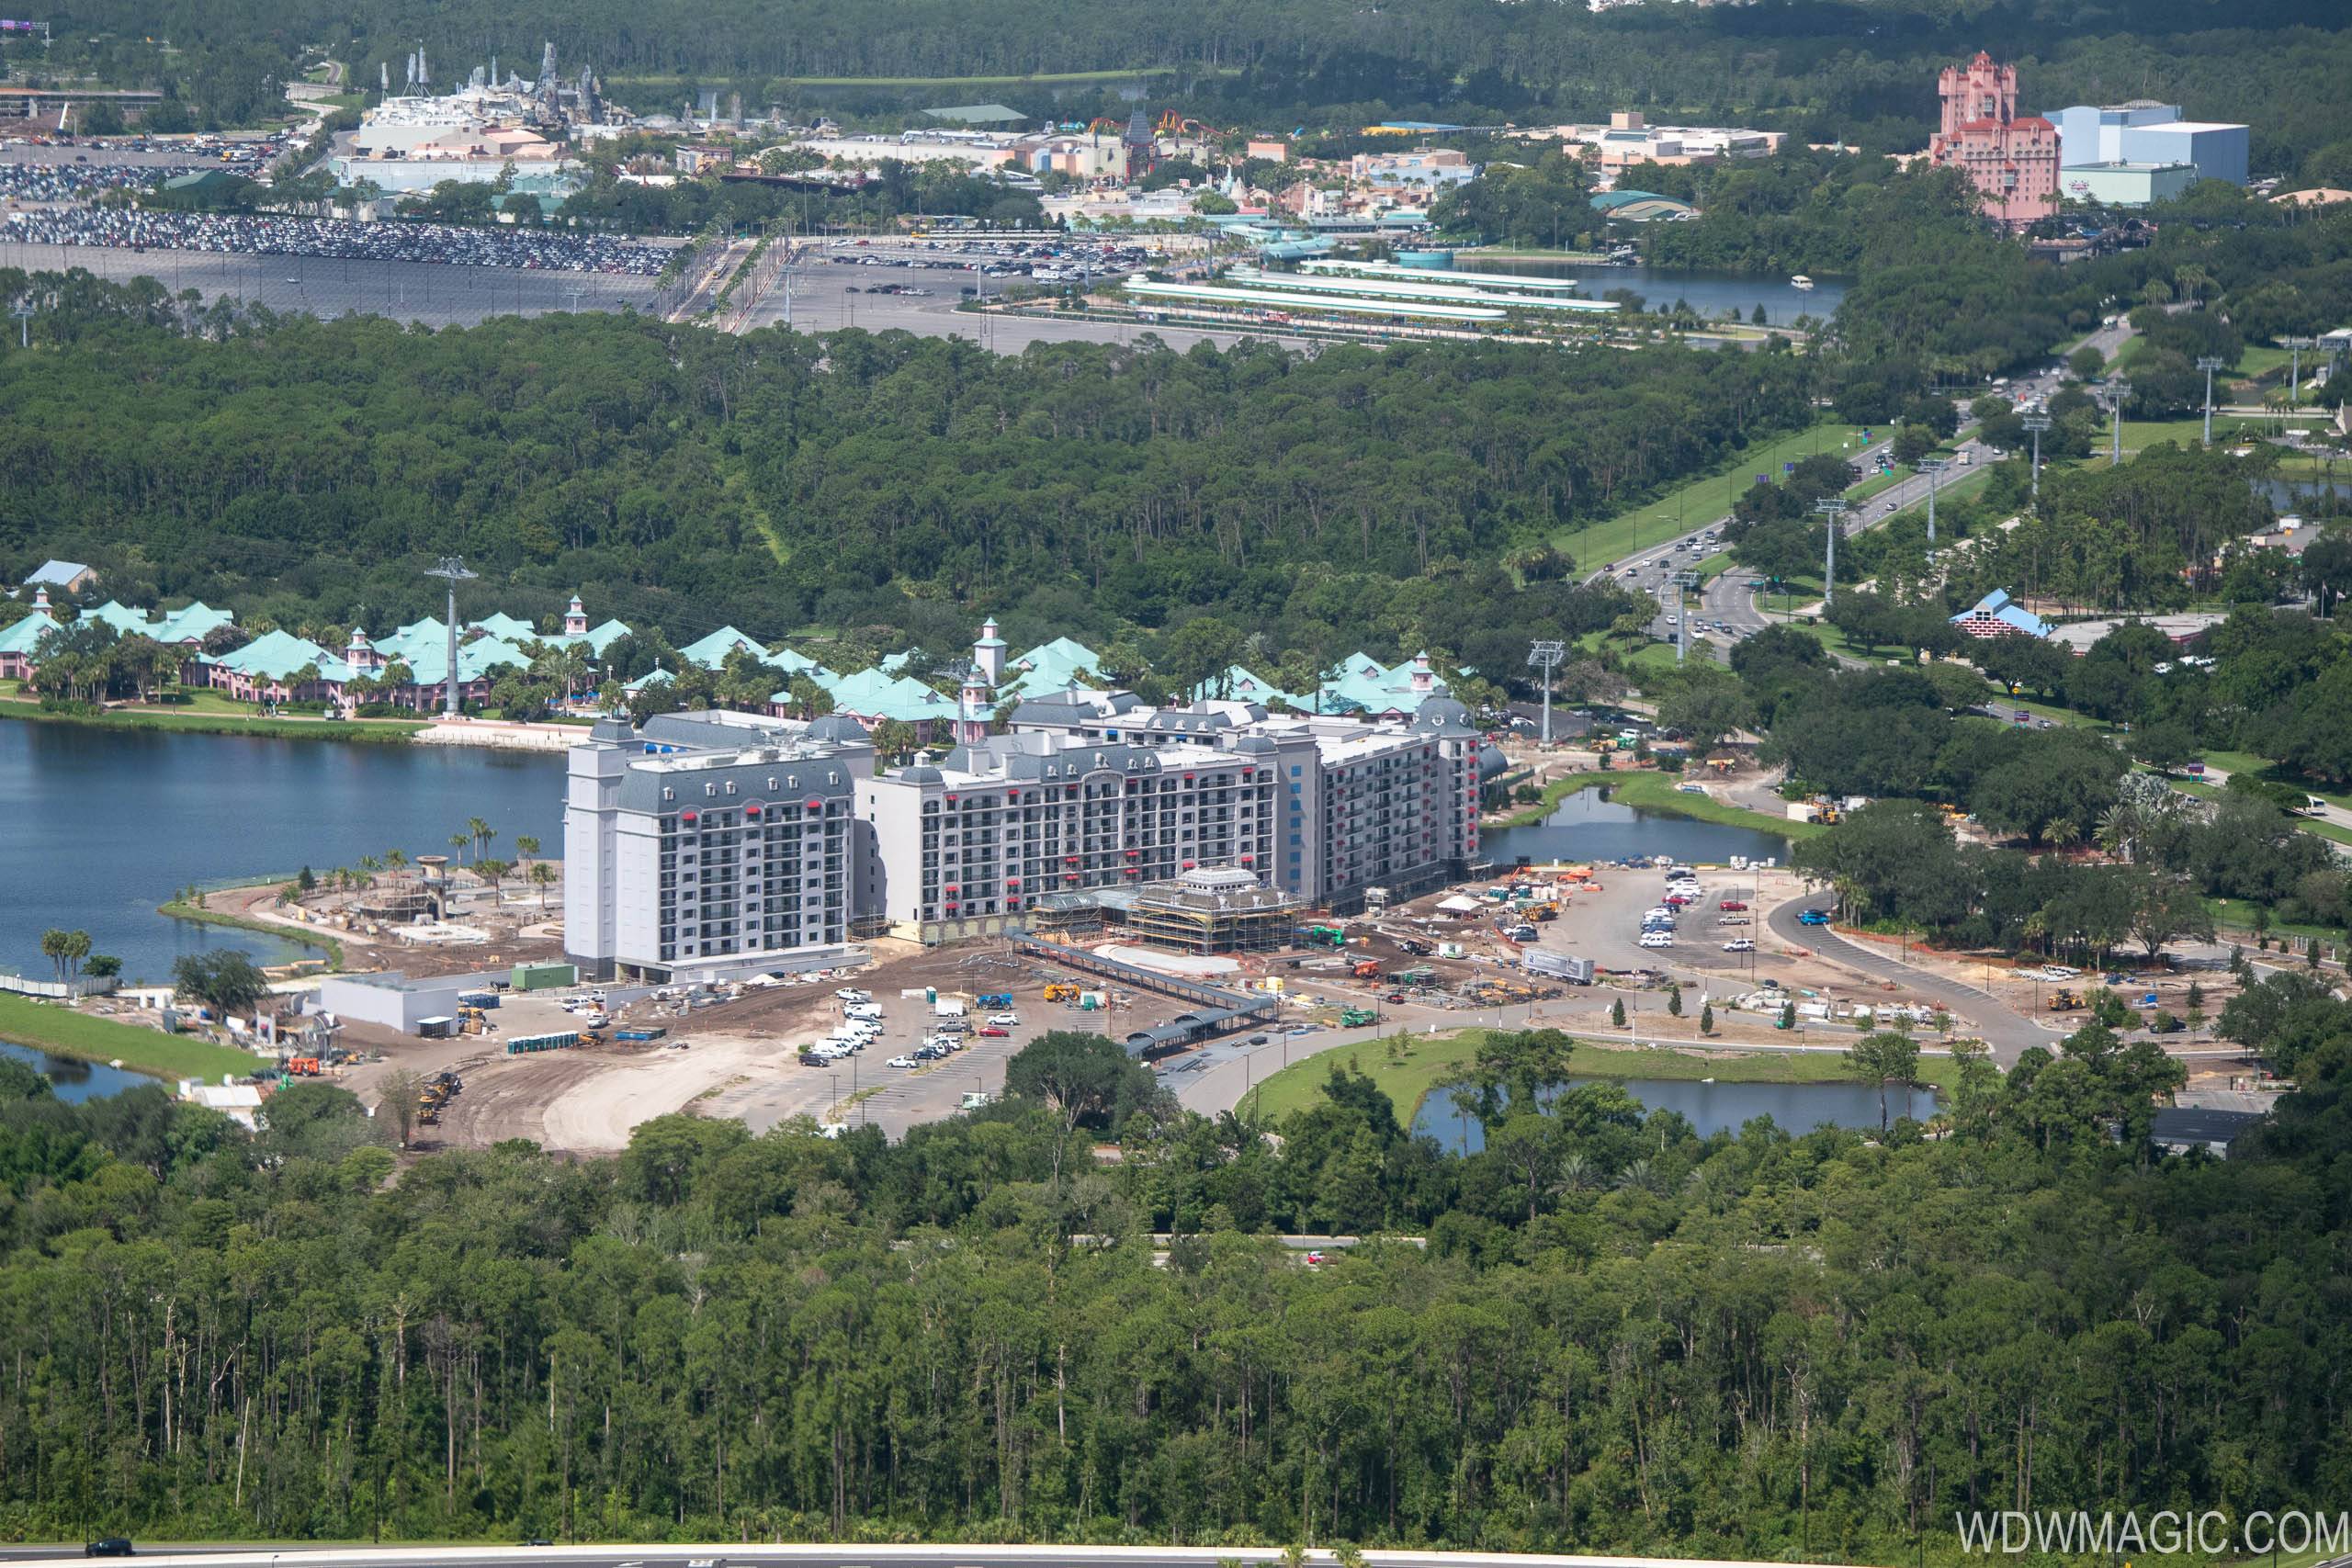 Disney Riviera construction from the air - July 2019